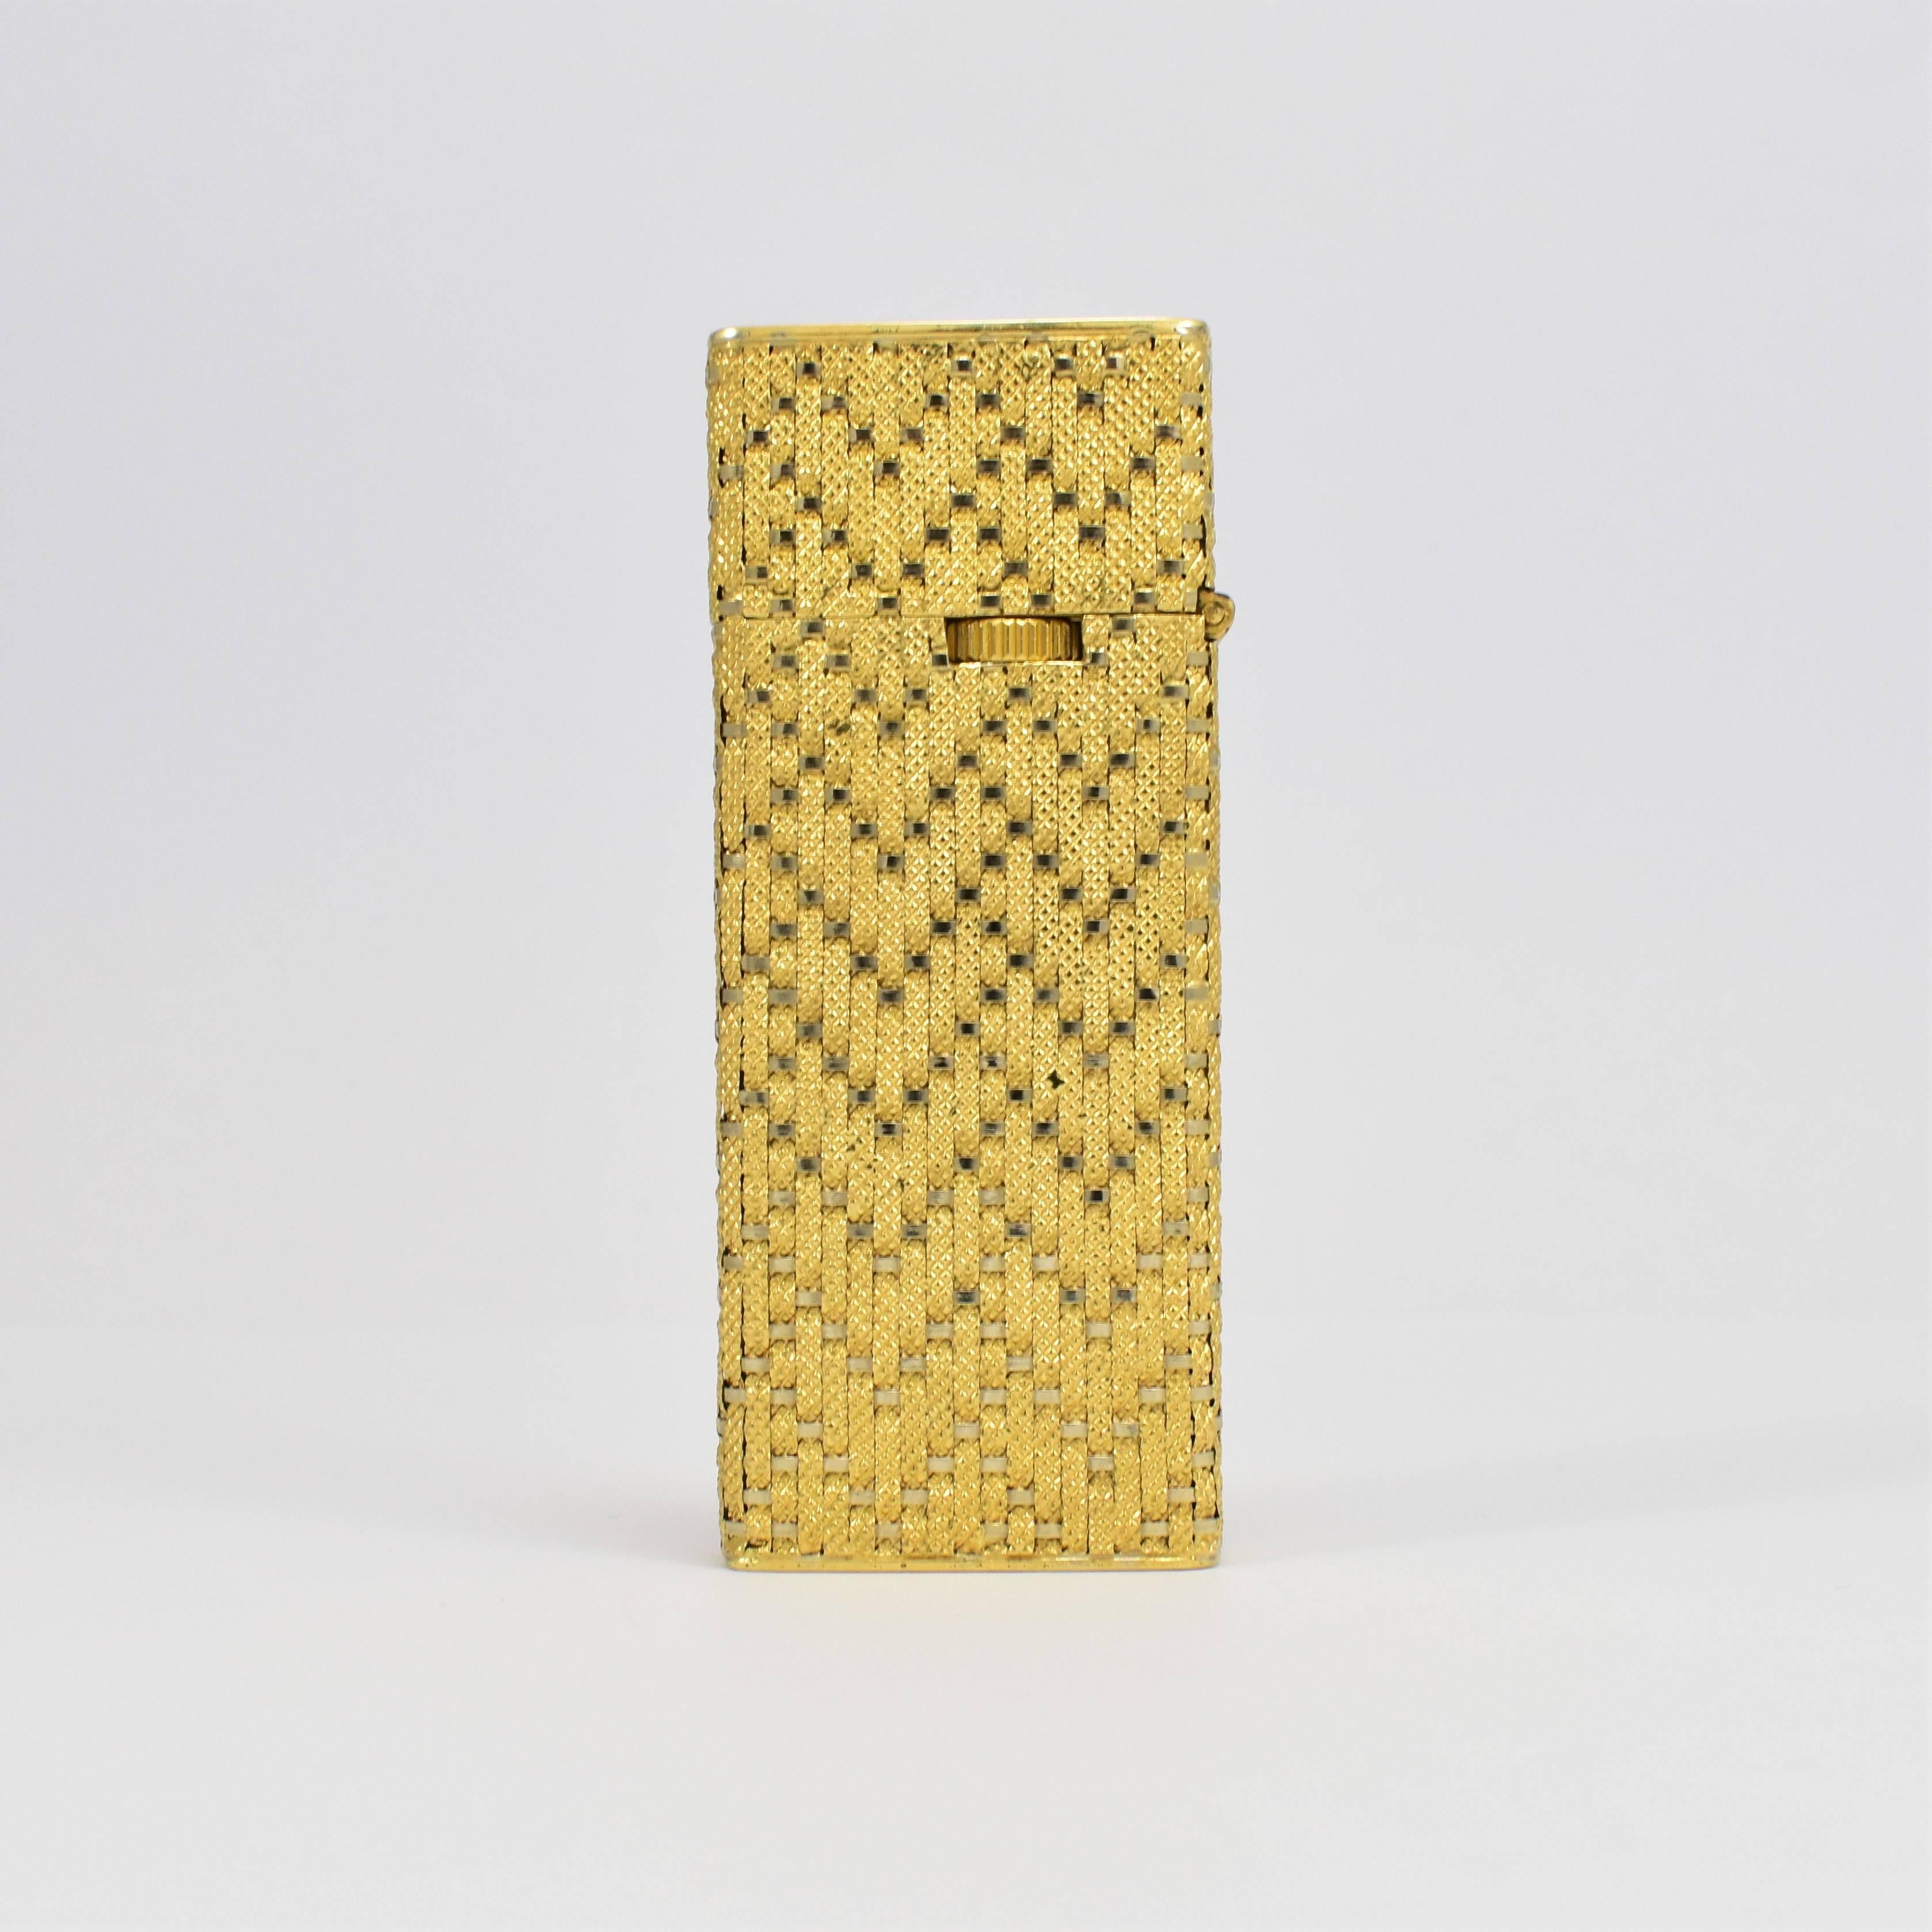 This 1960s lighter of immaculate craftsmanship in rendered incased in woven (tested as) 18-karat yellow gold, weighing 48.25 grams. The artistic basket weave pattern on both sides creates an ornate, stylish design. This collectible piece functions